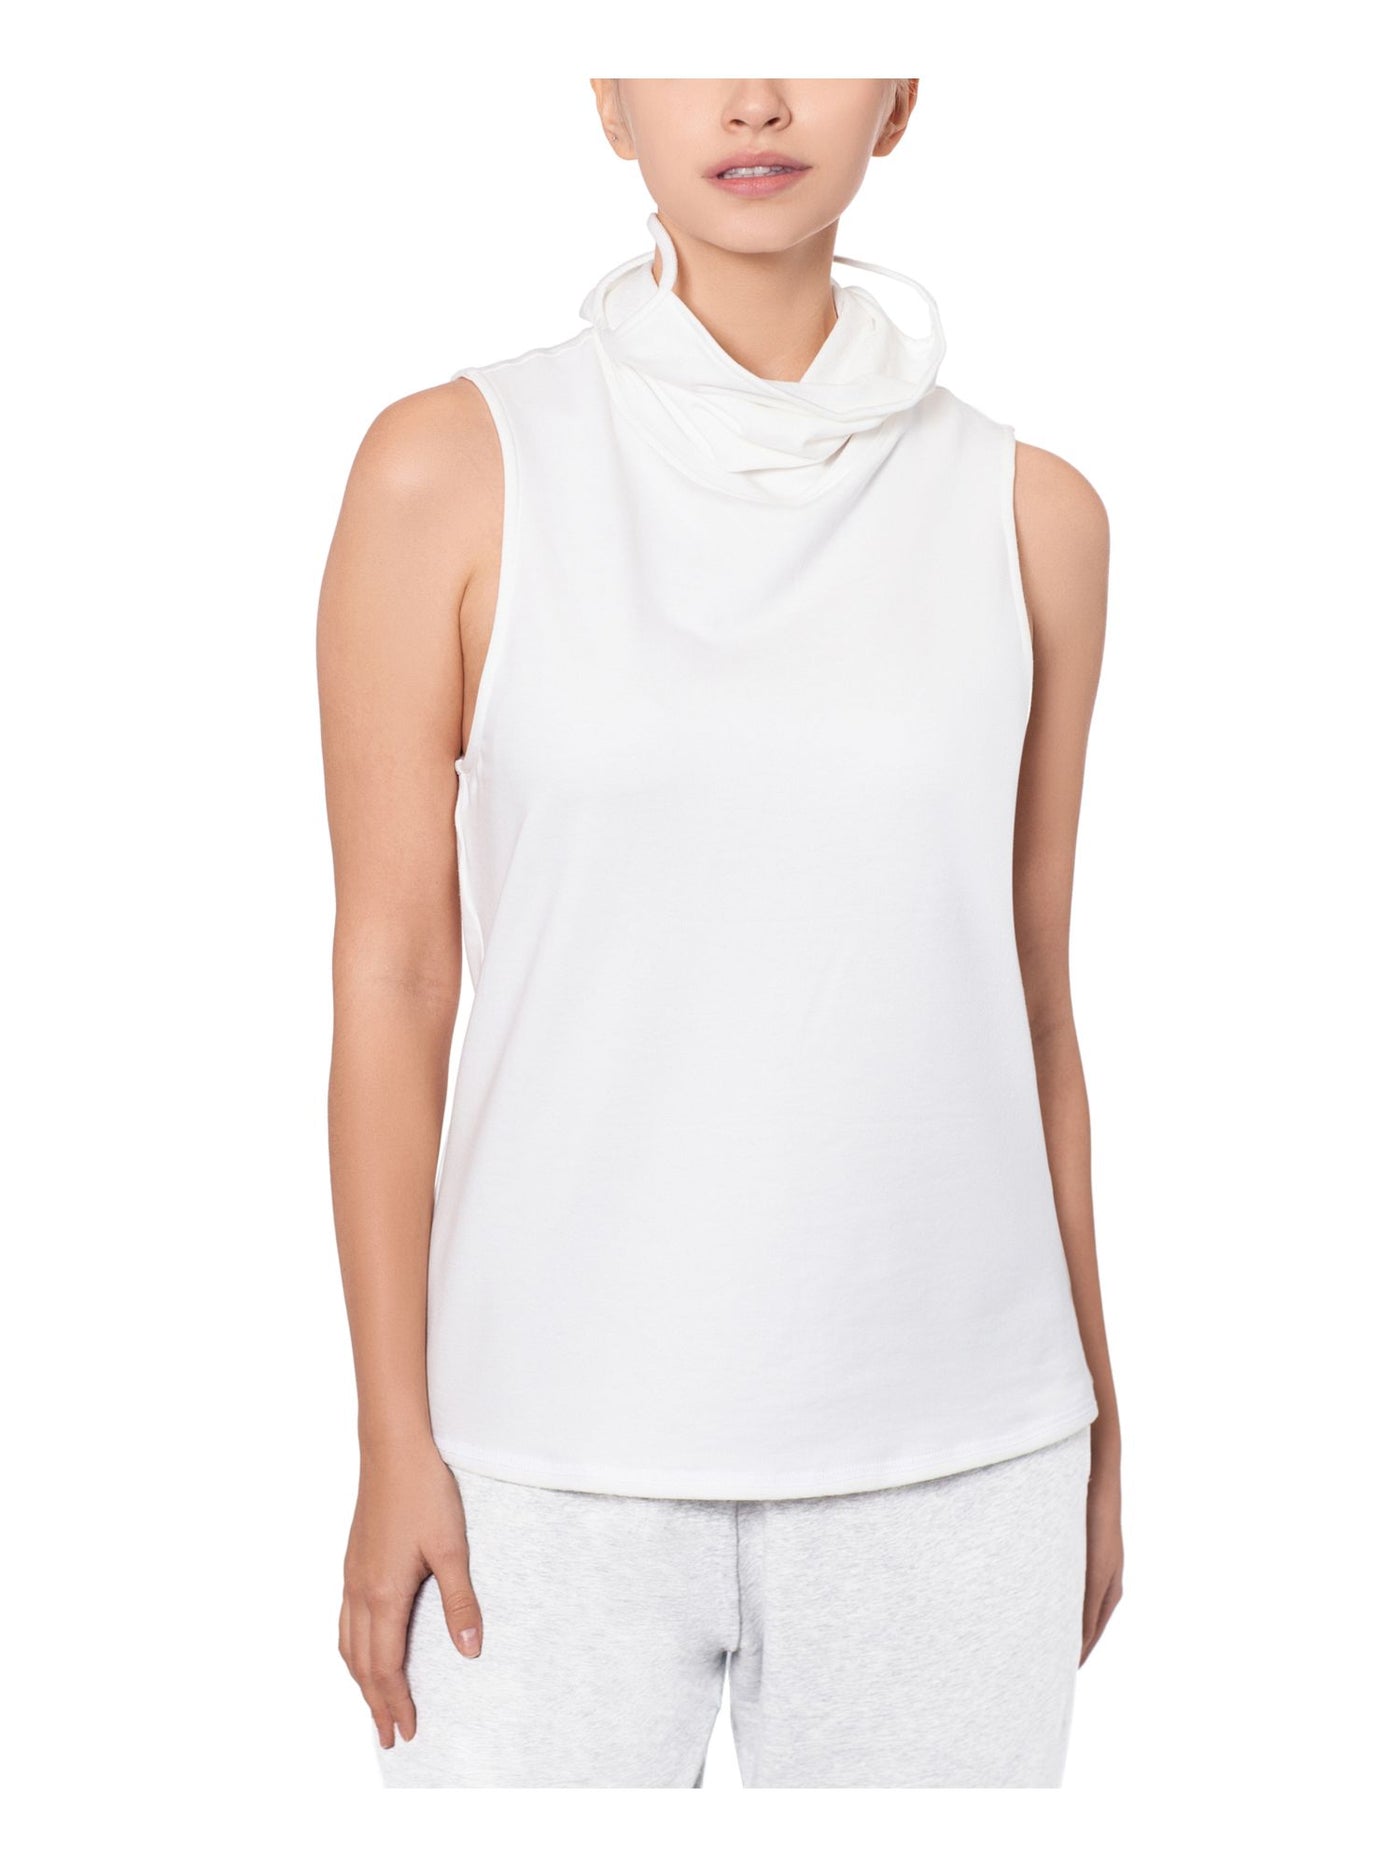 BAM BY BETSY & ADAM Womens White Cotton Blend Sleeveless Scoop Neck Wear To Work Tank Top XS